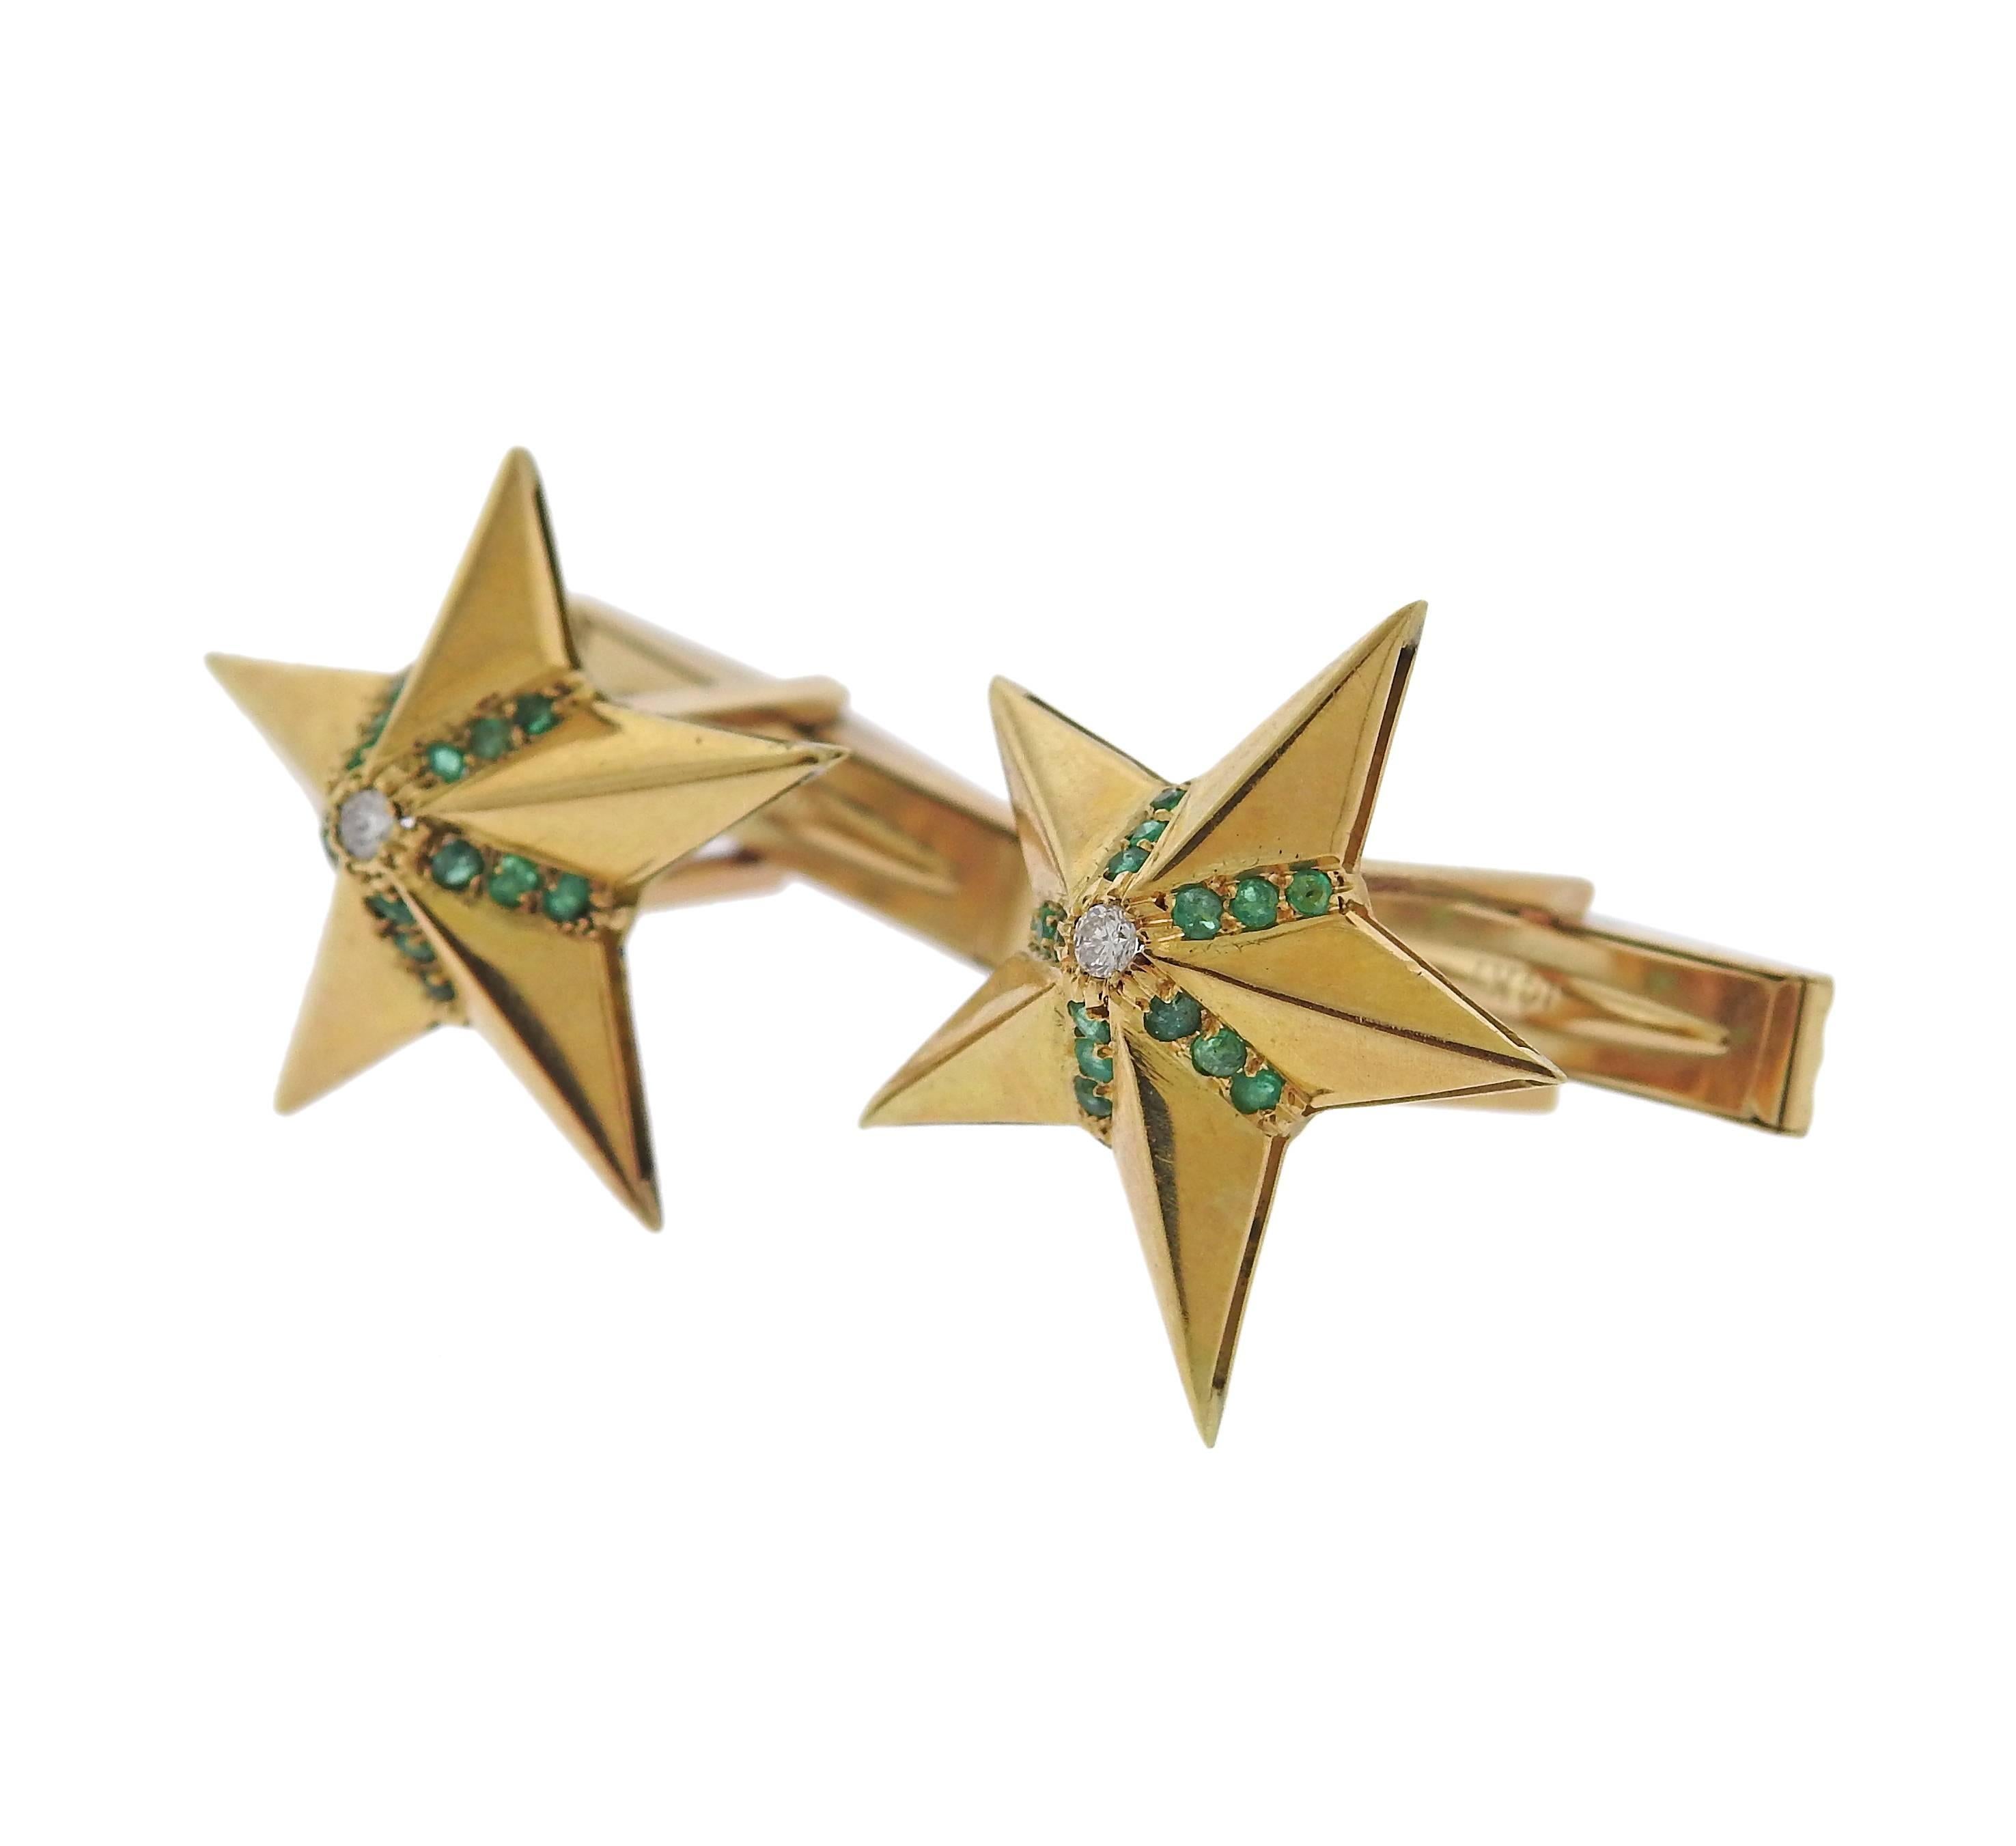 Pair of antique 18k gold star cufflinks, decorated with diamonds and emeralds. Cufflink top 24mm x 23mm, weight - 9.5 grams.  Top tested 18k, hardware marked 14k, 